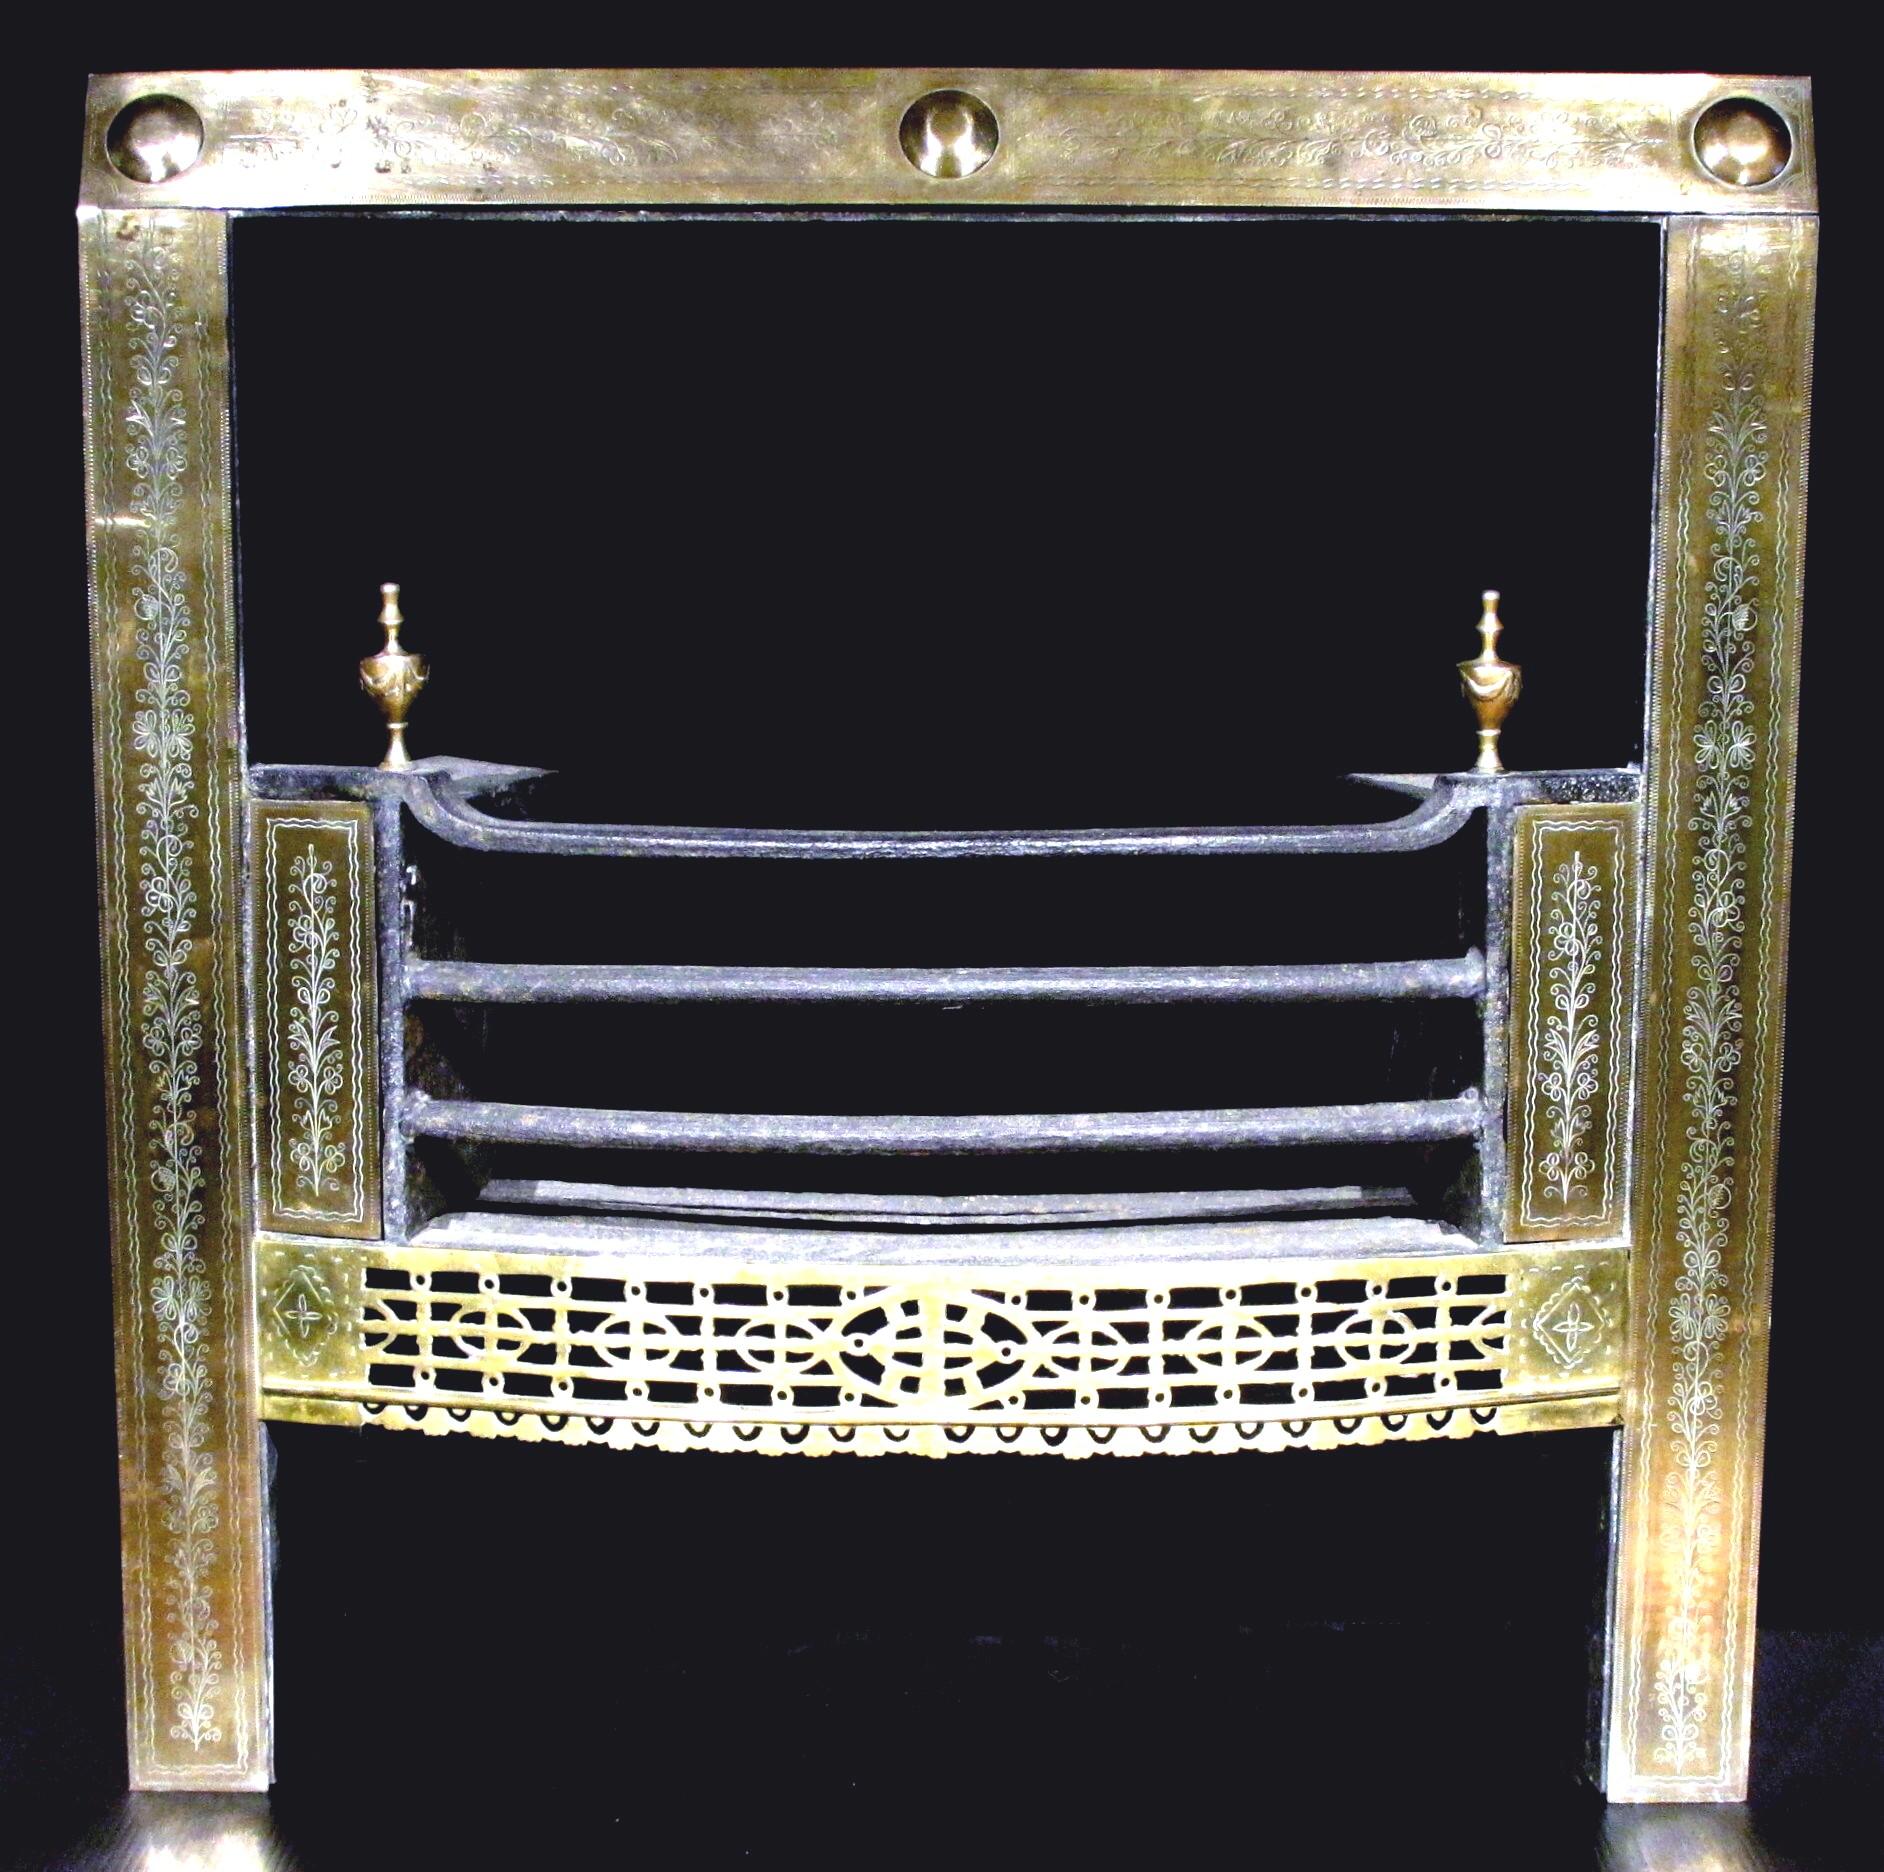 A very handsome 18th century Georgian Irish fire grate / register, showing a brass surround engraved with neoclassical motifs, framing an iron basket with a triple bar grate, flanked on either side by similarly engraved brass-panelled fire cheeks